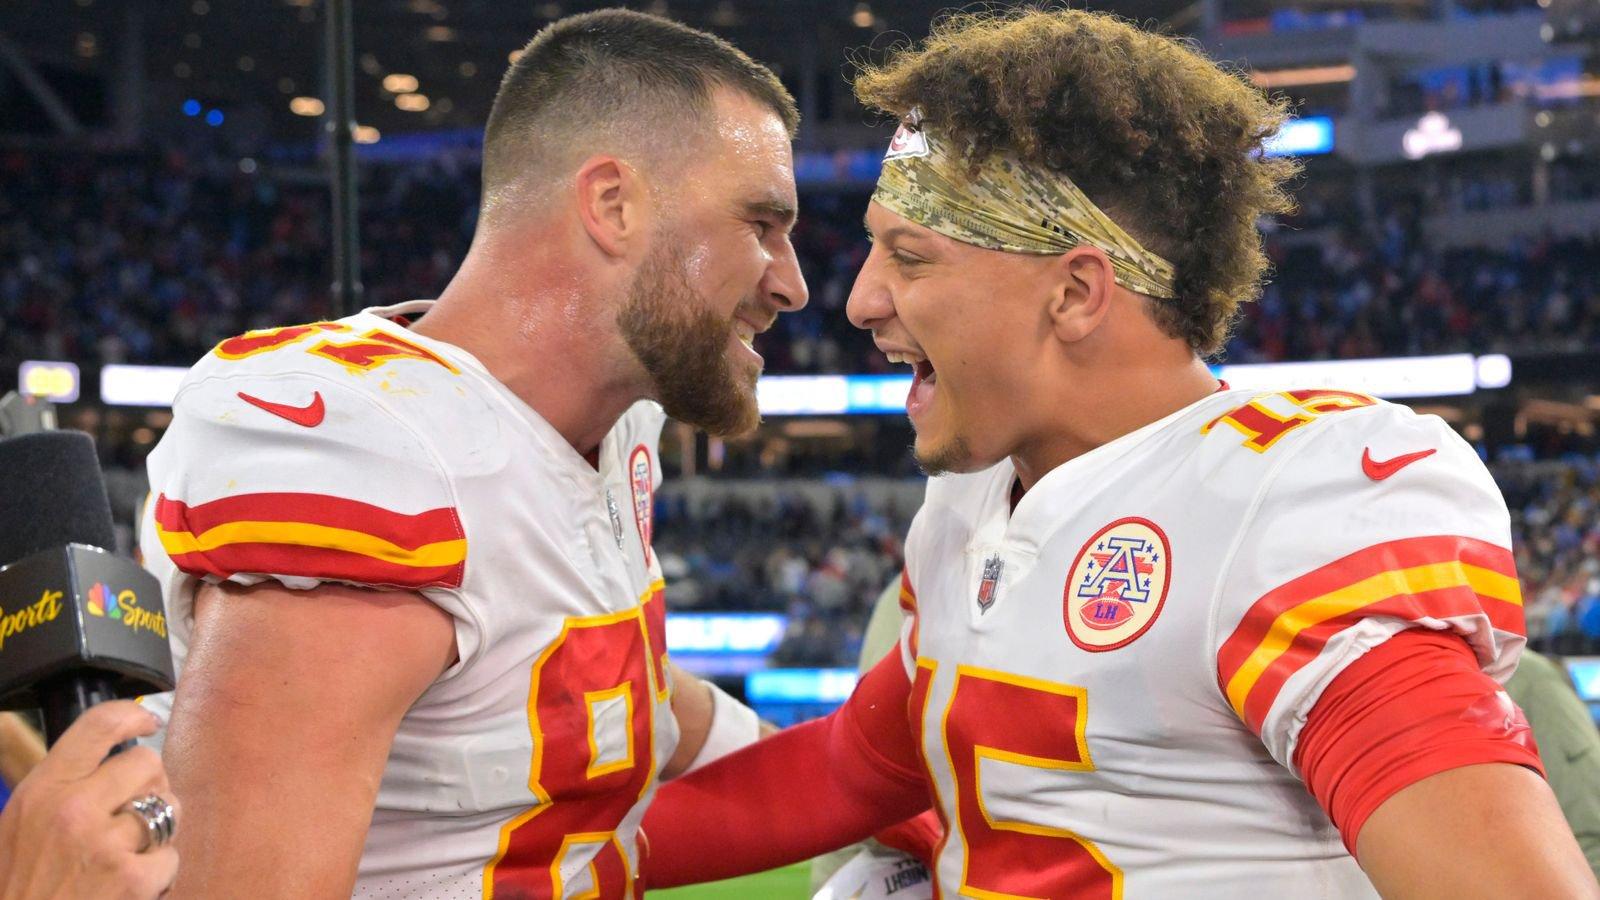 Rams vs Chiefs Prediction & Picks: Will Mahomes inflict more misery on the champs? cover